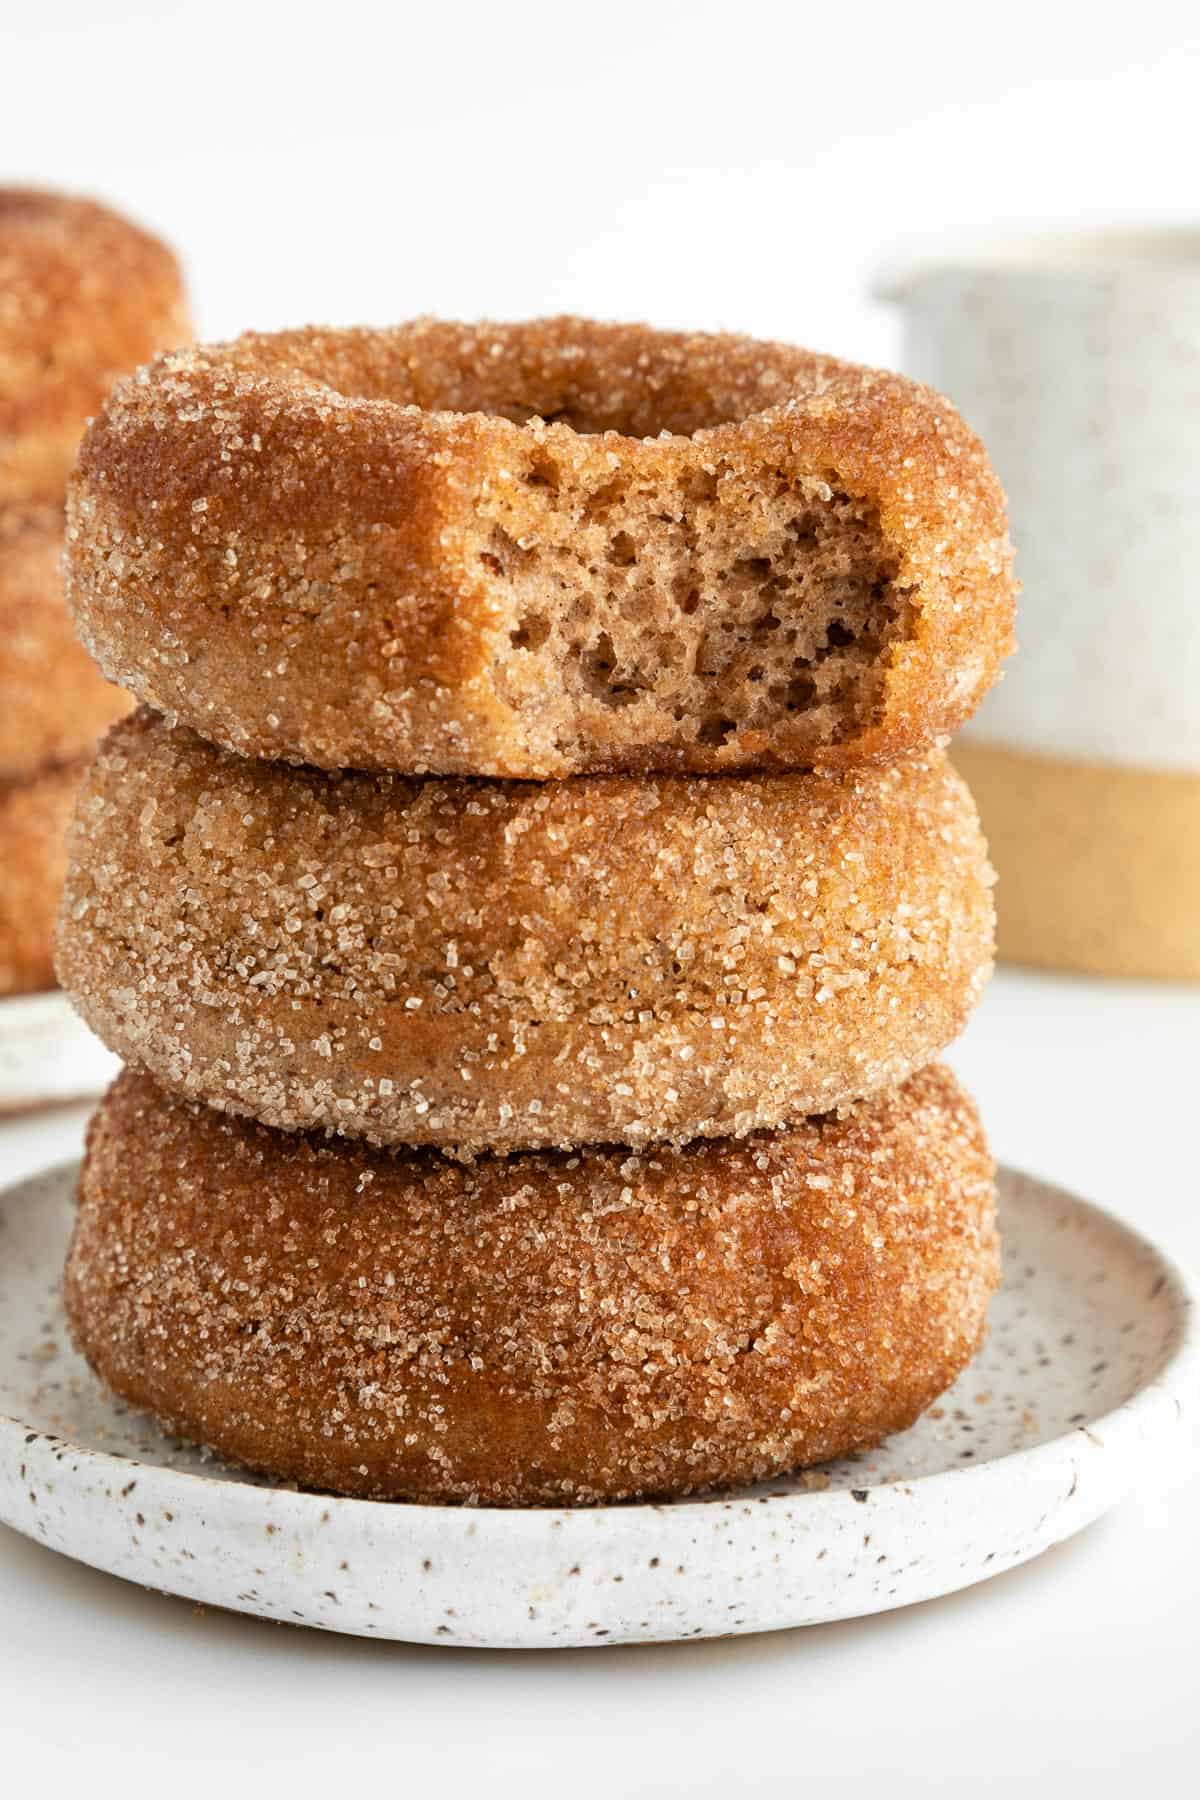 three vegan cinnamon sugar donuts stacked with a bite taken out of the top donut